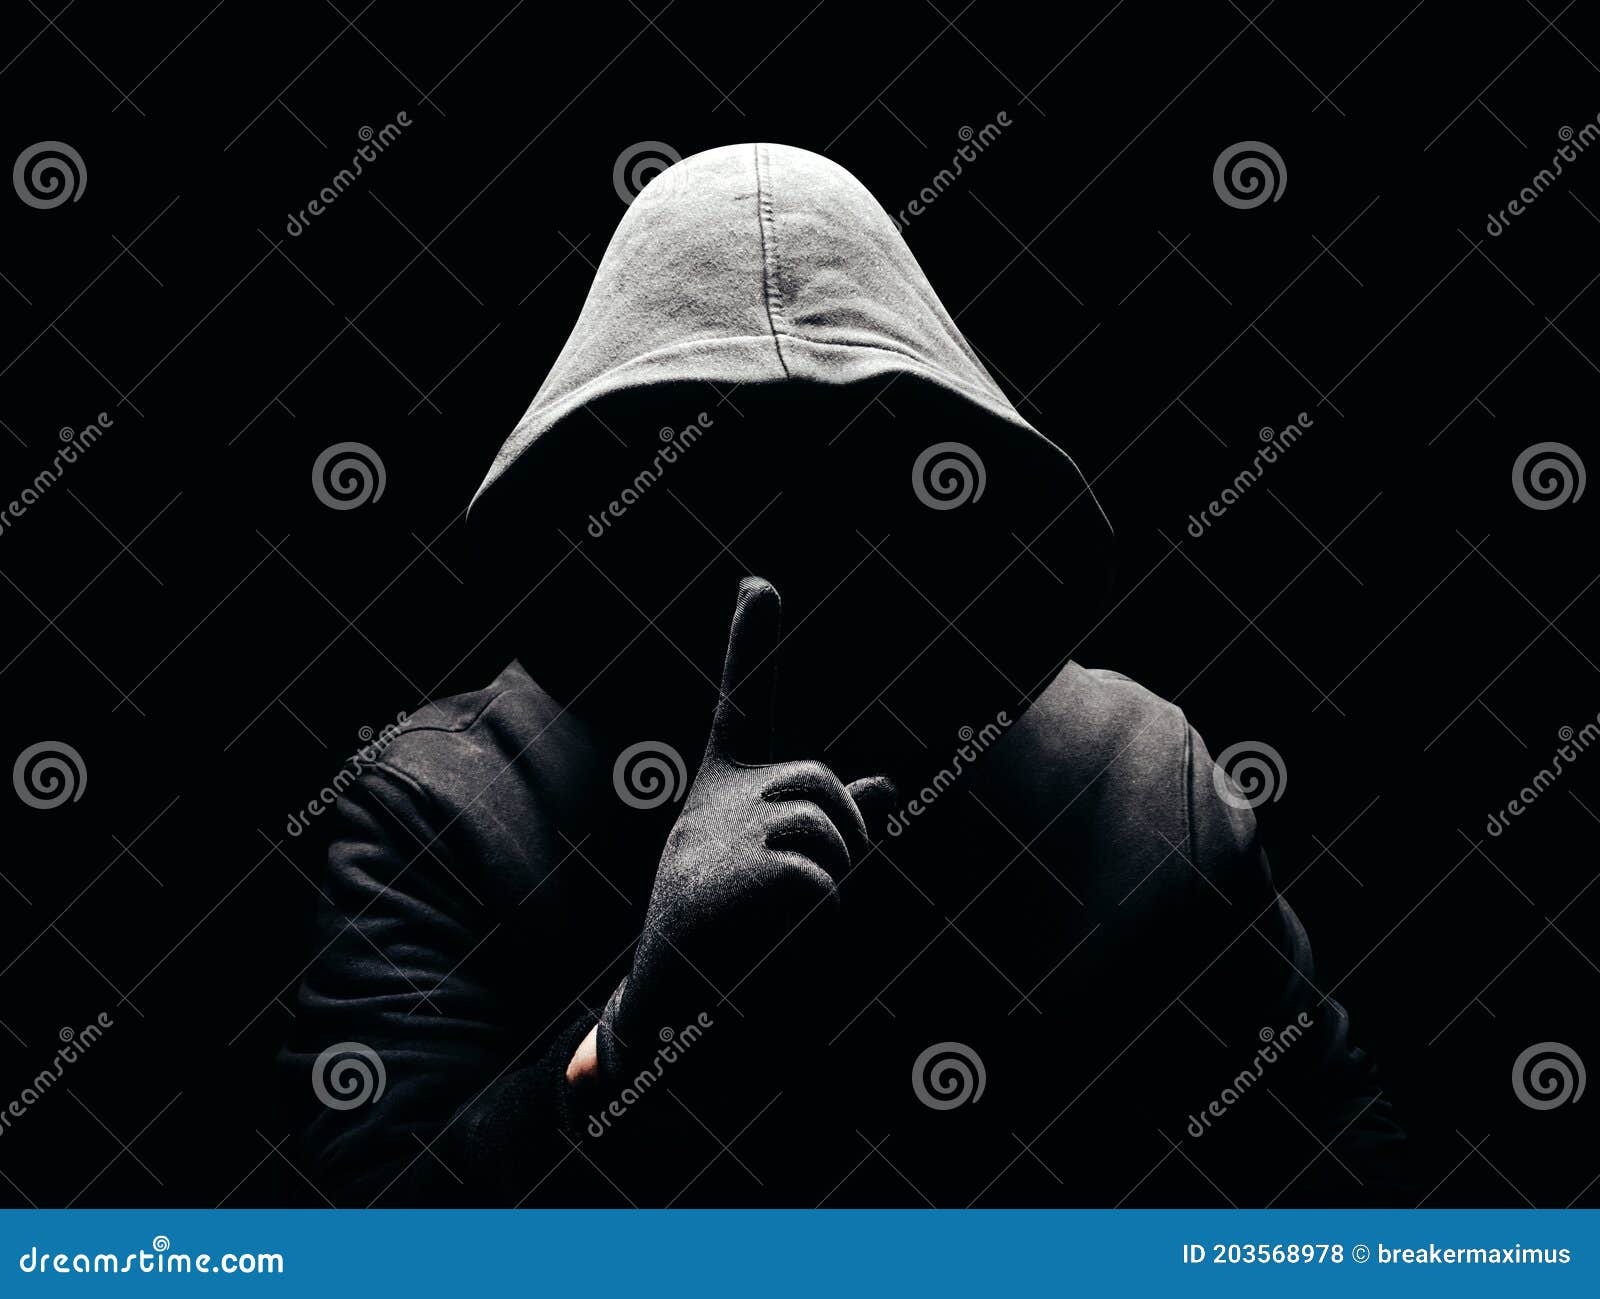 scary man in hood showing silence sign